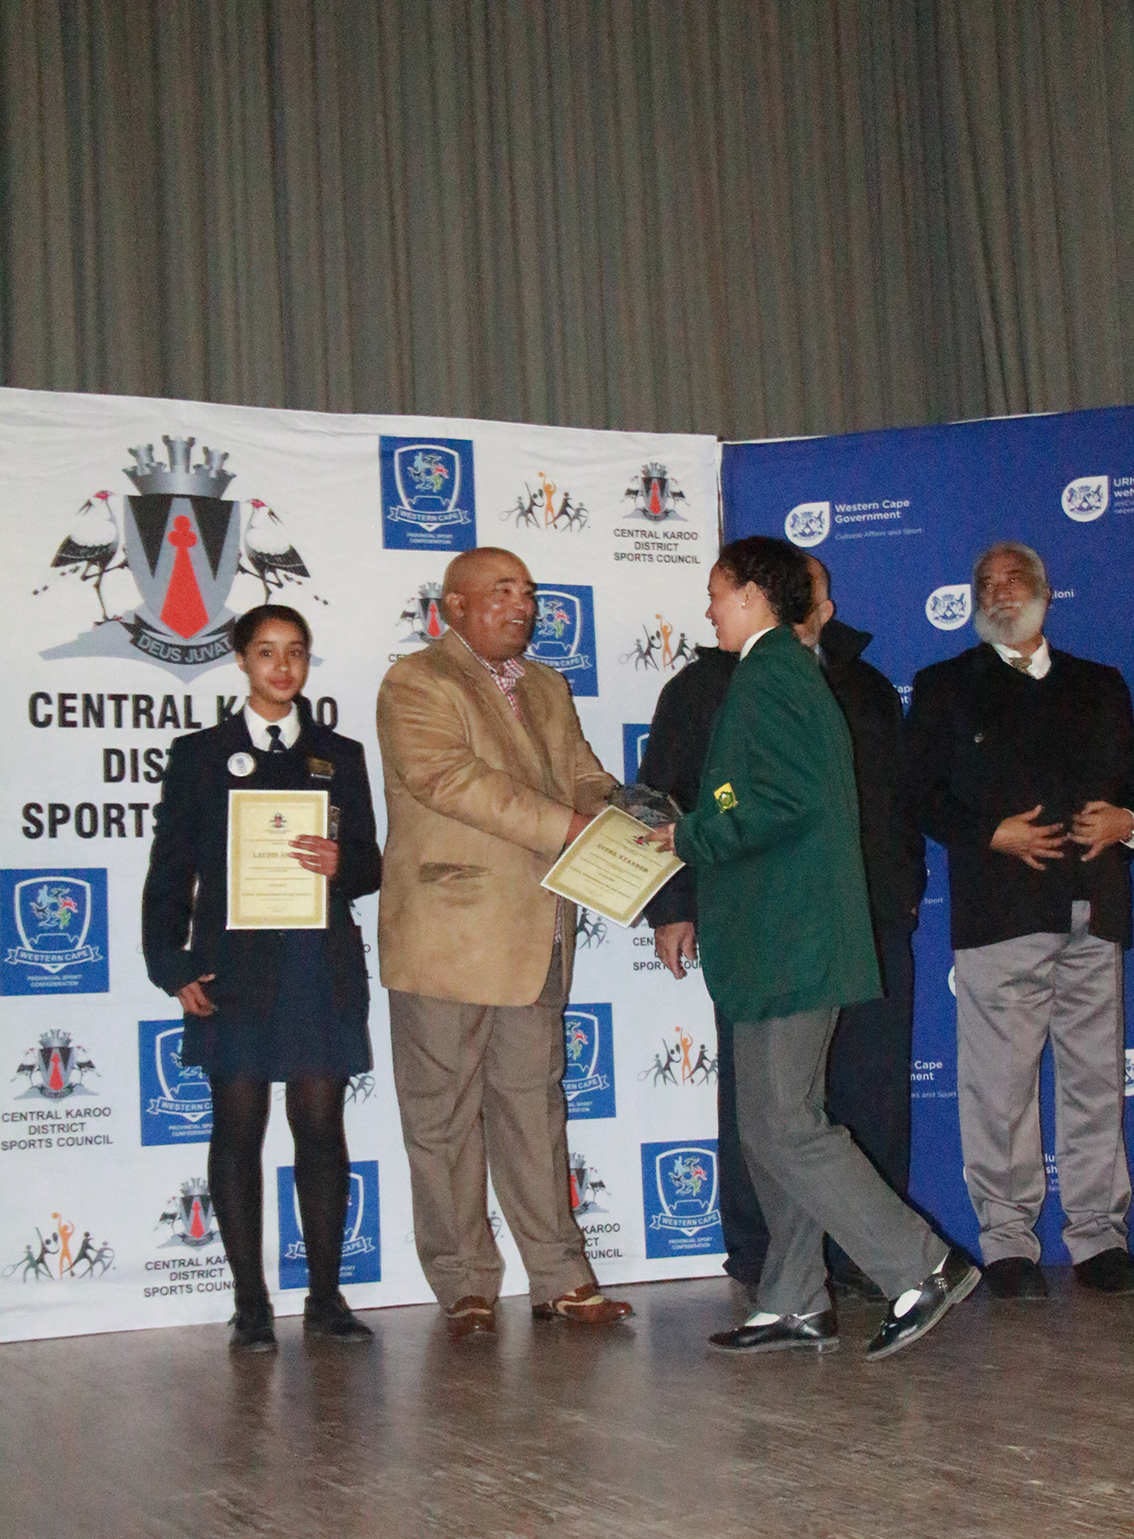 Newcomer of the Year, Githe Stander, accepting her award from David Maans, Chairperson of the Central Karoo Sport Council